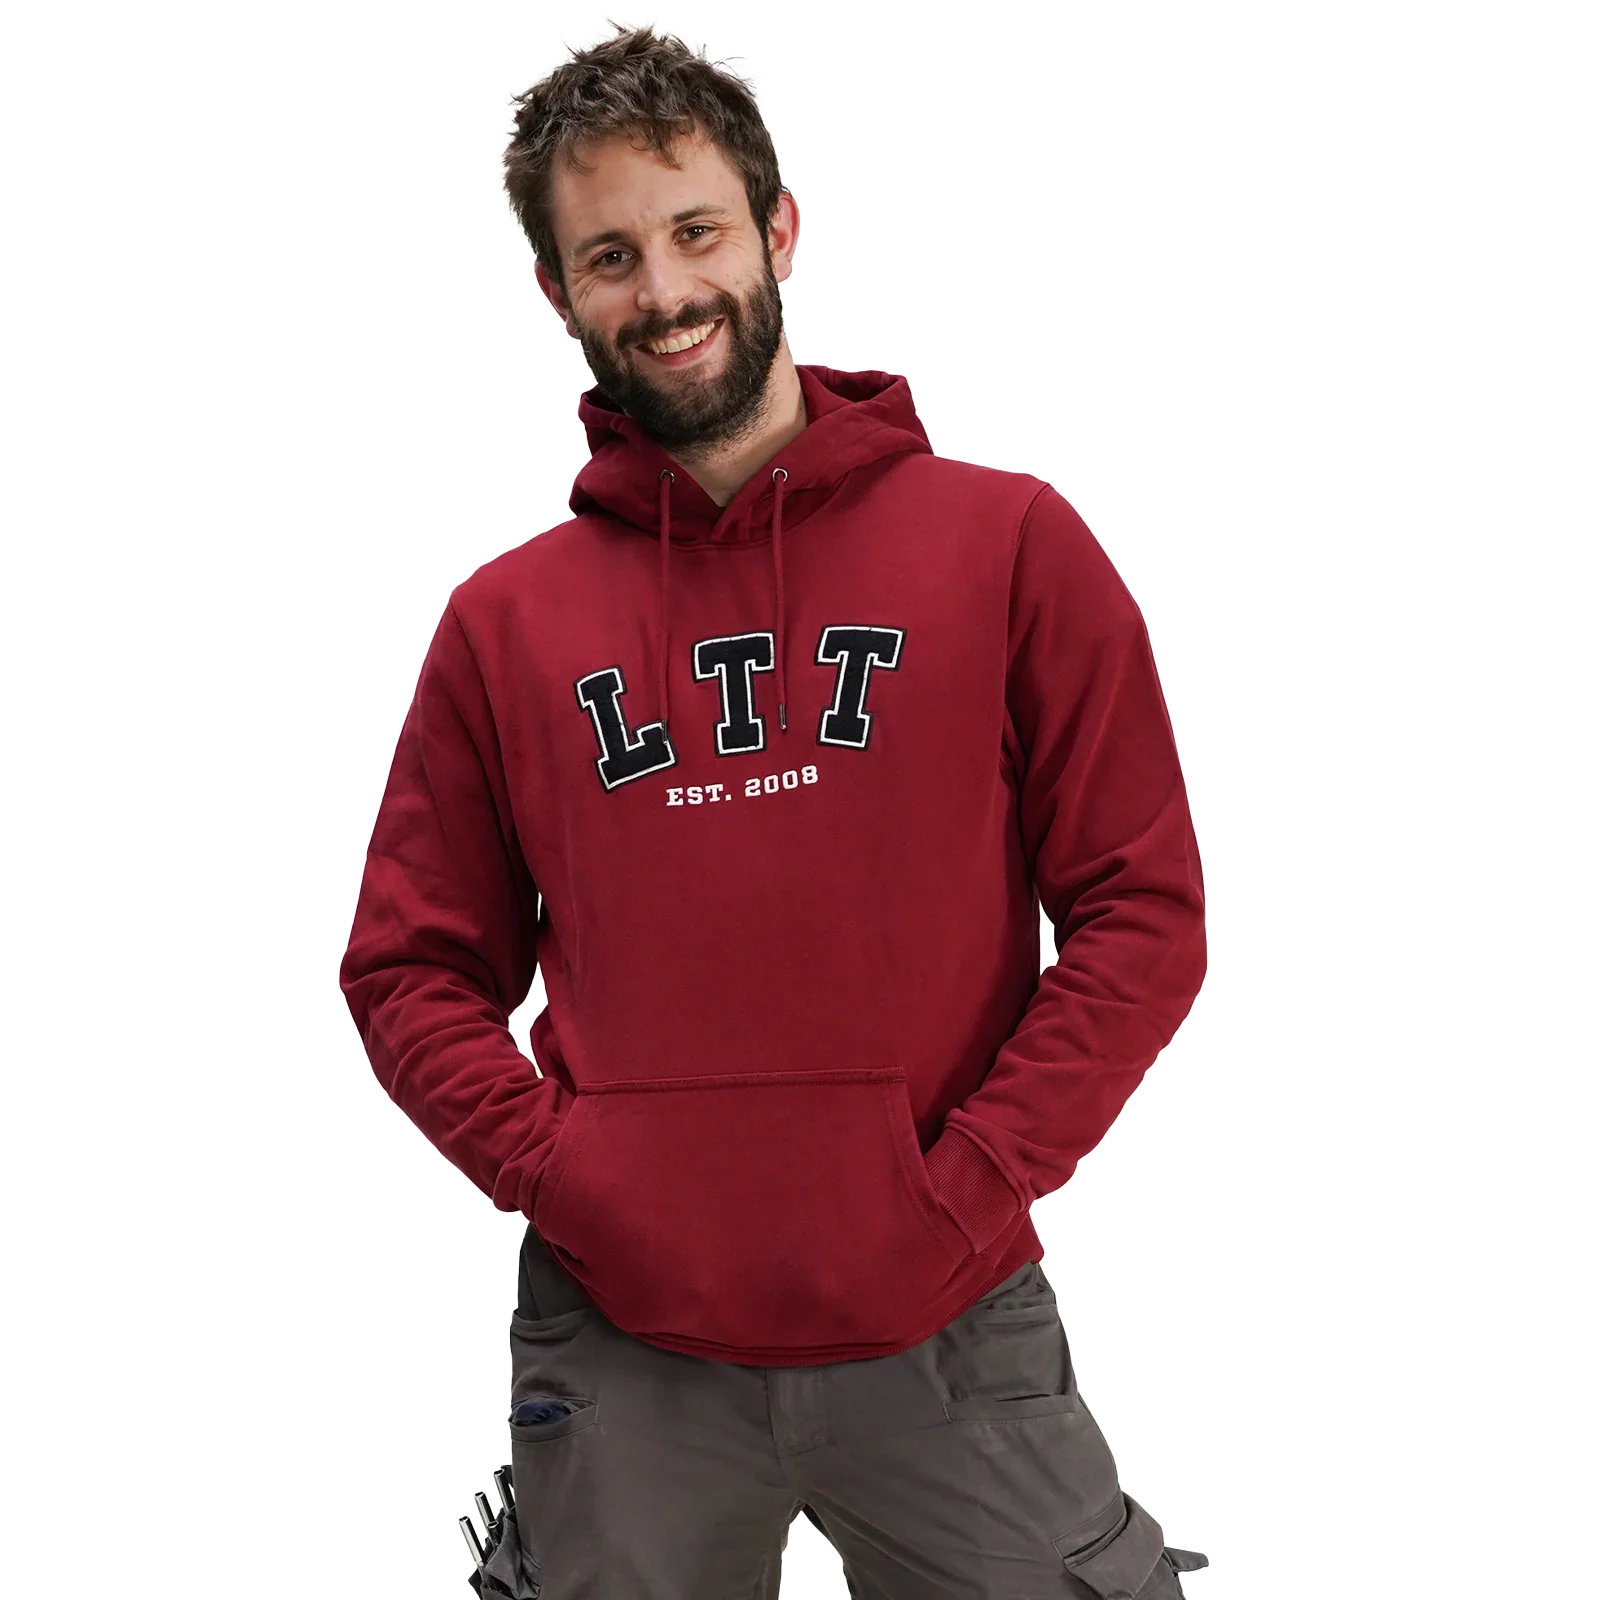 Tech Hoodies - The Perfect Blend of Style and Function